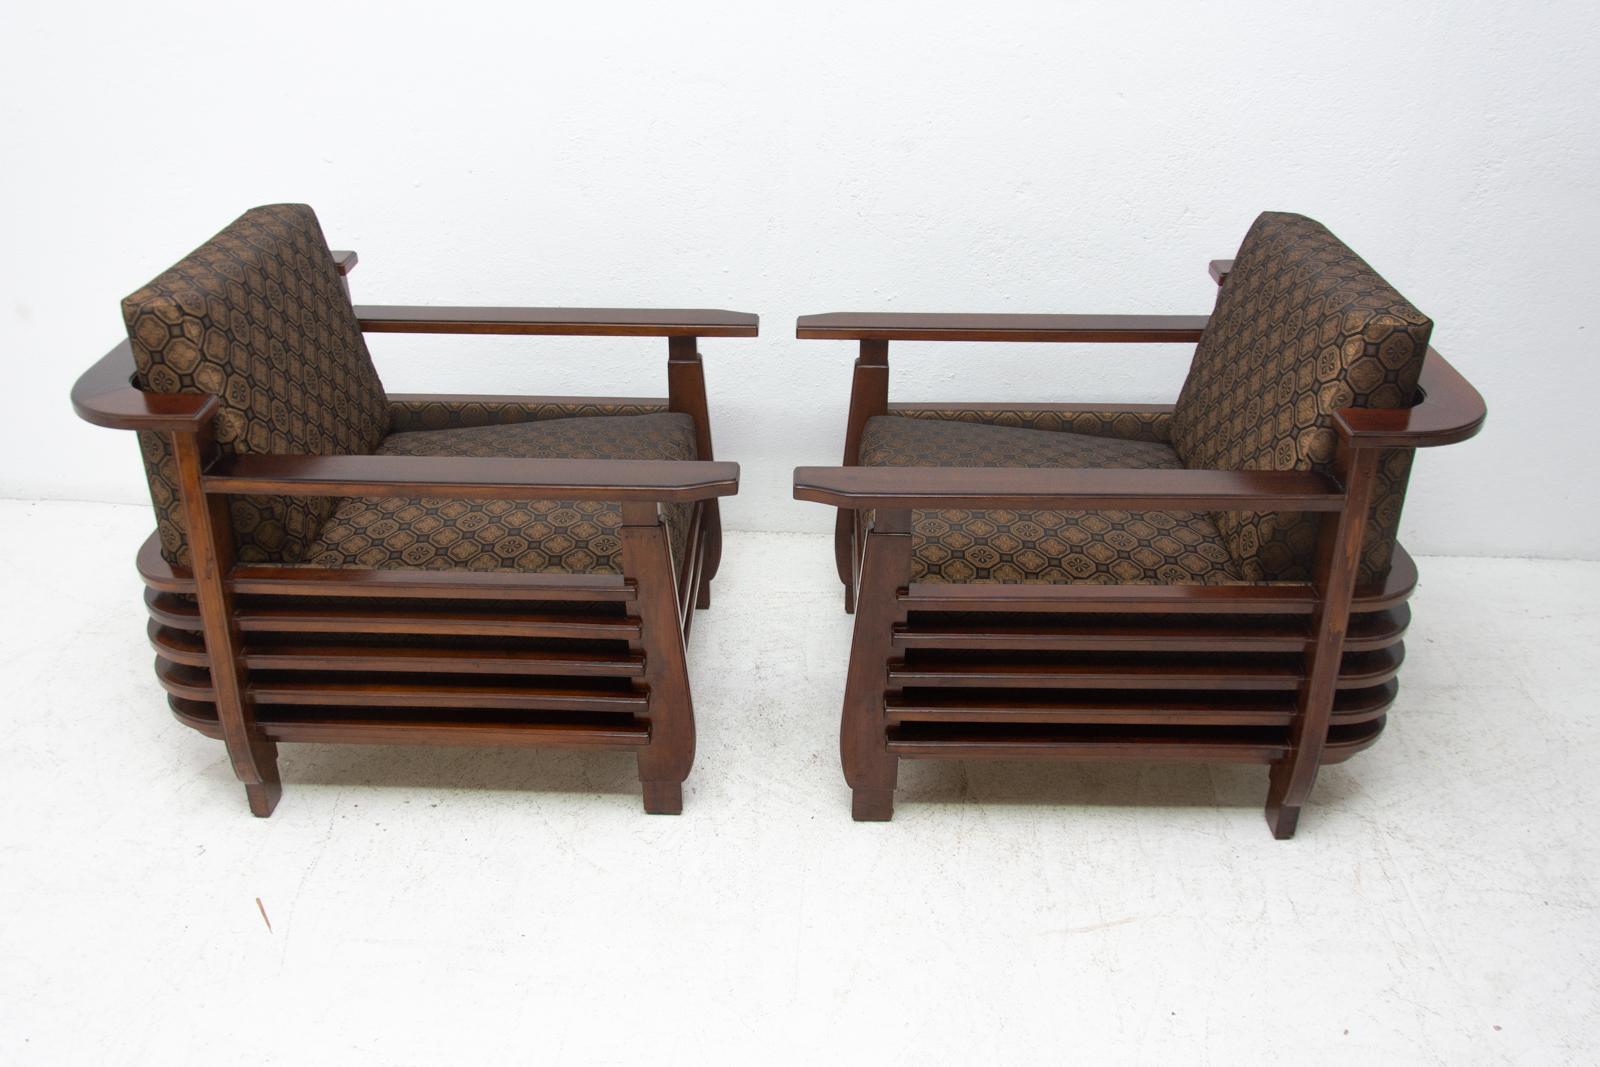 Pair of Fully Restored Functionalist Armchairs, 1930s, Austria, Bauhaus Period For Sale 2